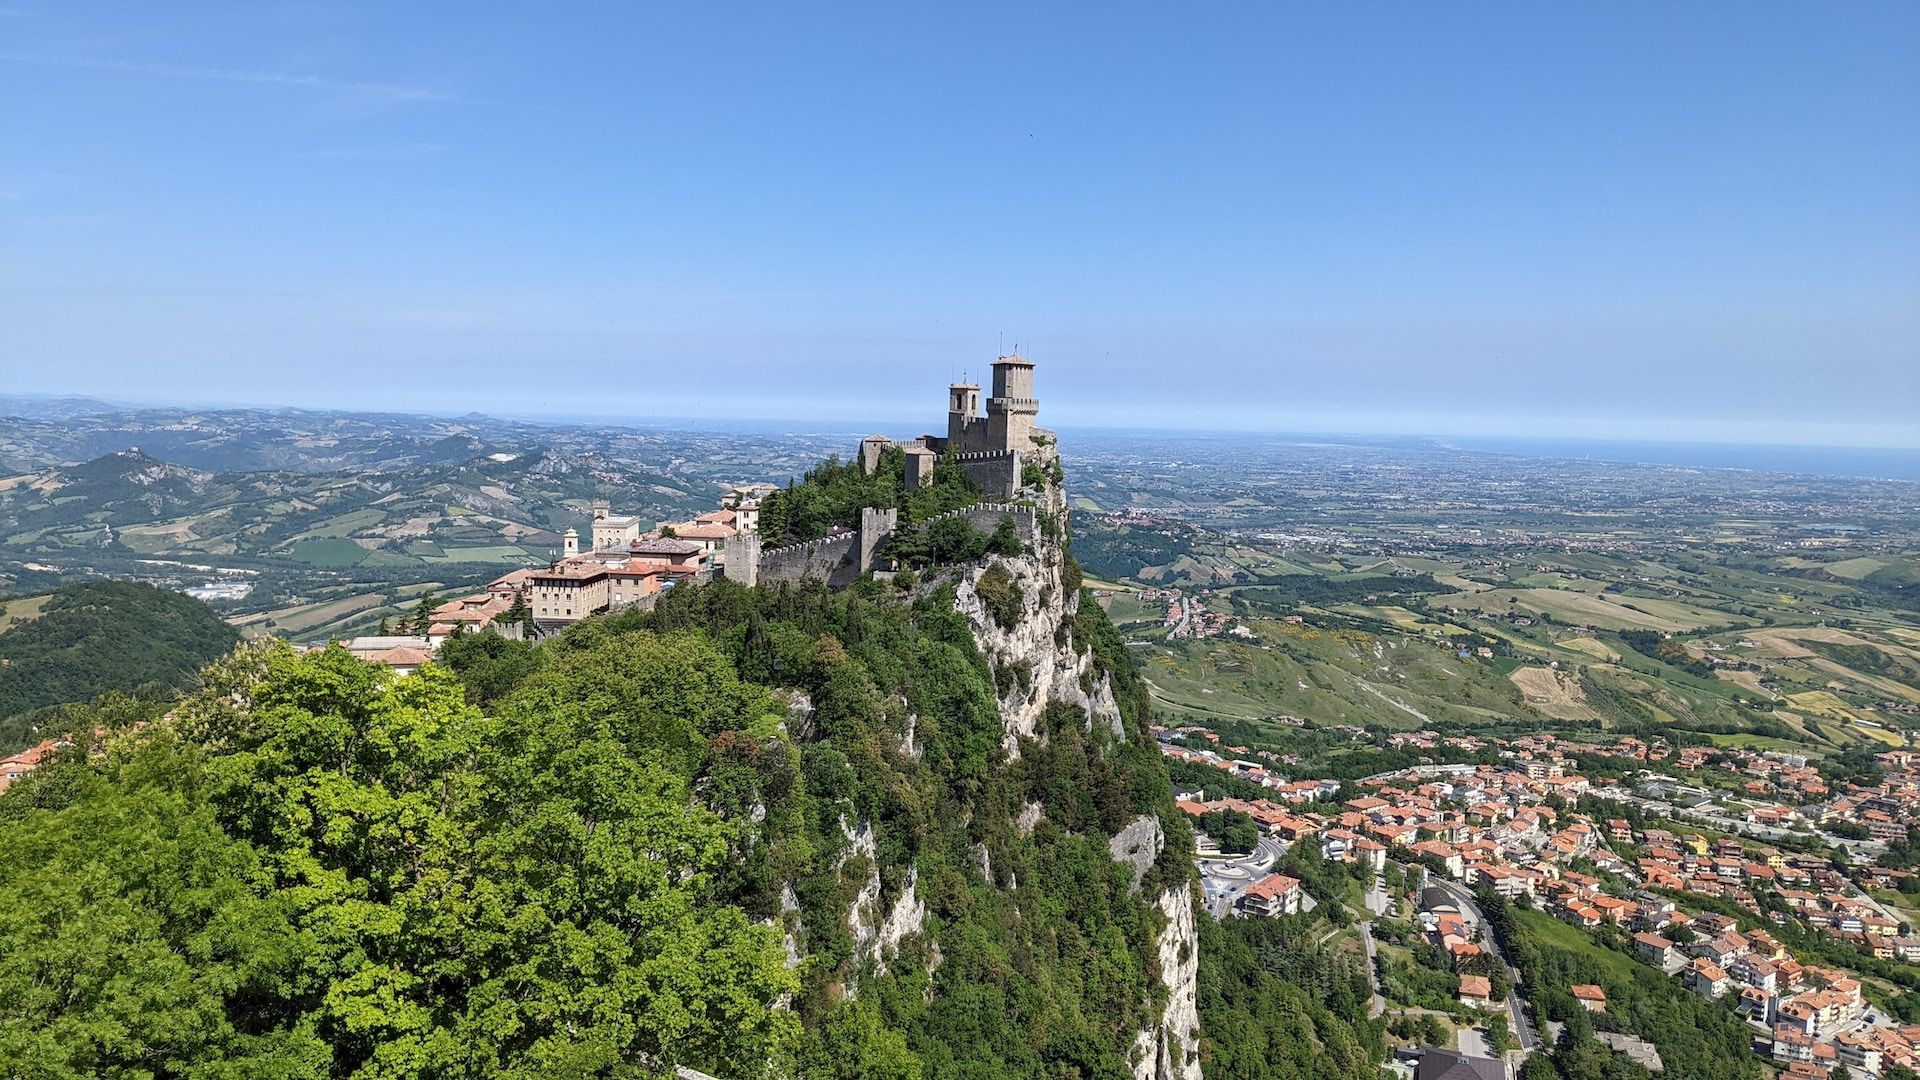 Guaita Tower and other historical buildings in San Marino